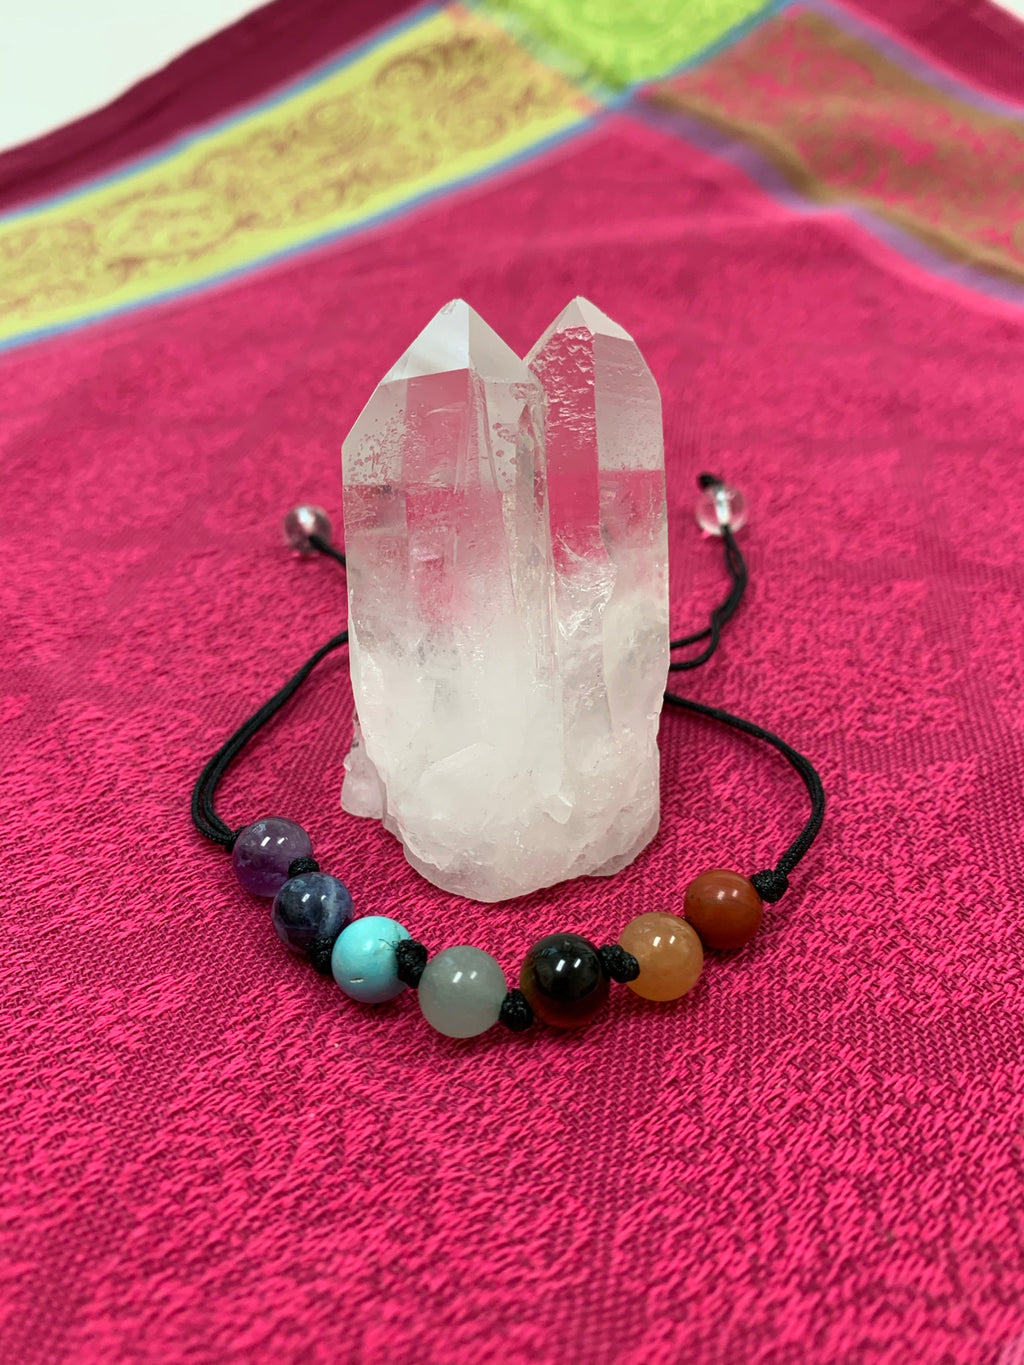 Adjustable Chakra power bracelet consists of 7 stones, one representing each of the 7 major chakras. It is artfully strung together with a strong, thin black cord and a tiny black knot between each chakra stone. Two additional clear quartz crystal stones embellish the adjustable part of the bracelet. 